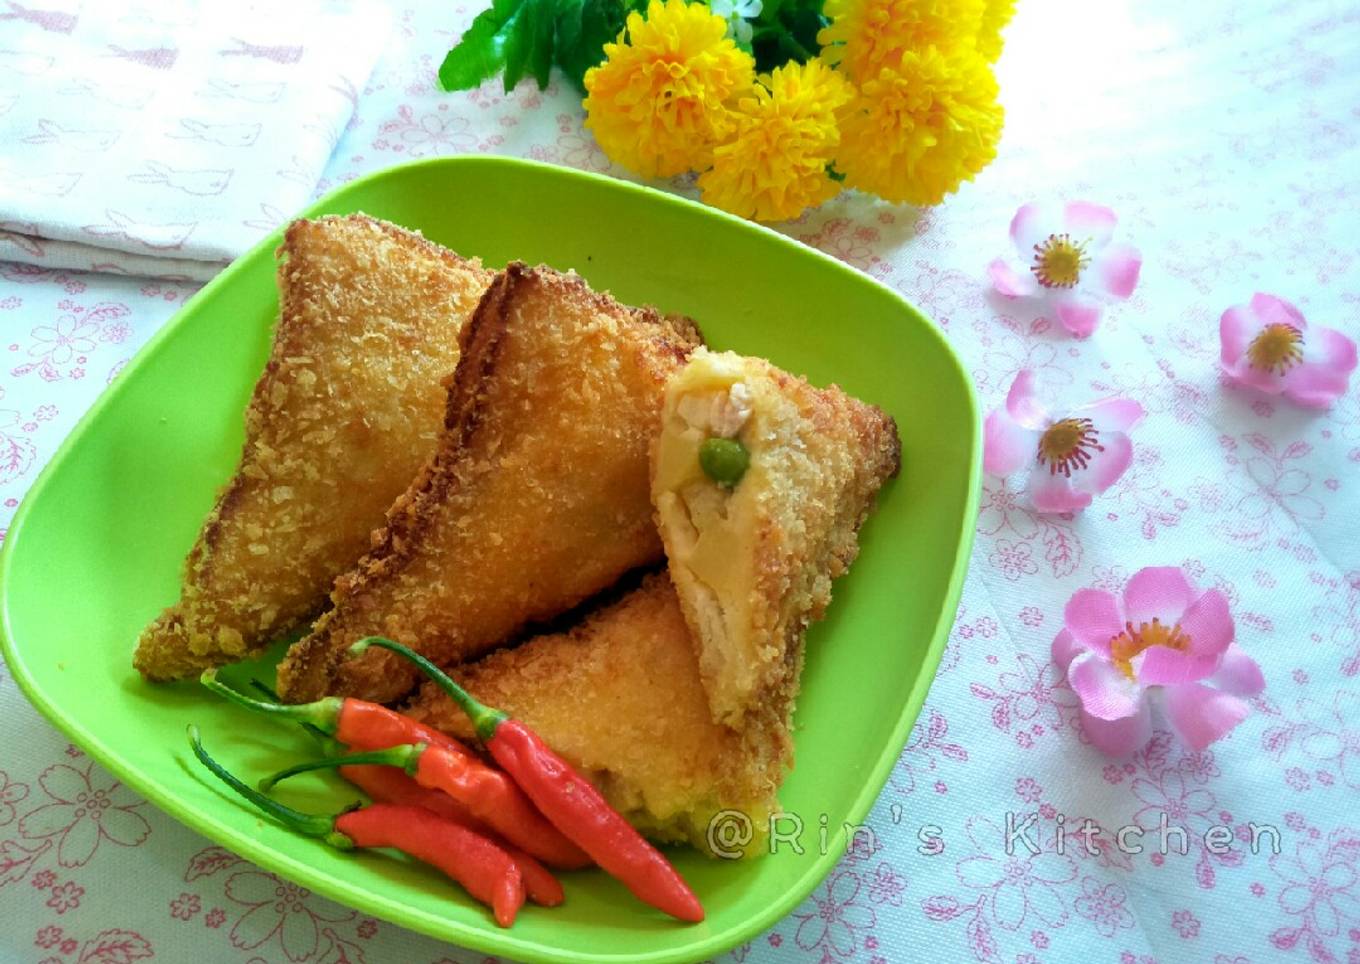 Fried Bread Stuffed with Chicken and Vegetables